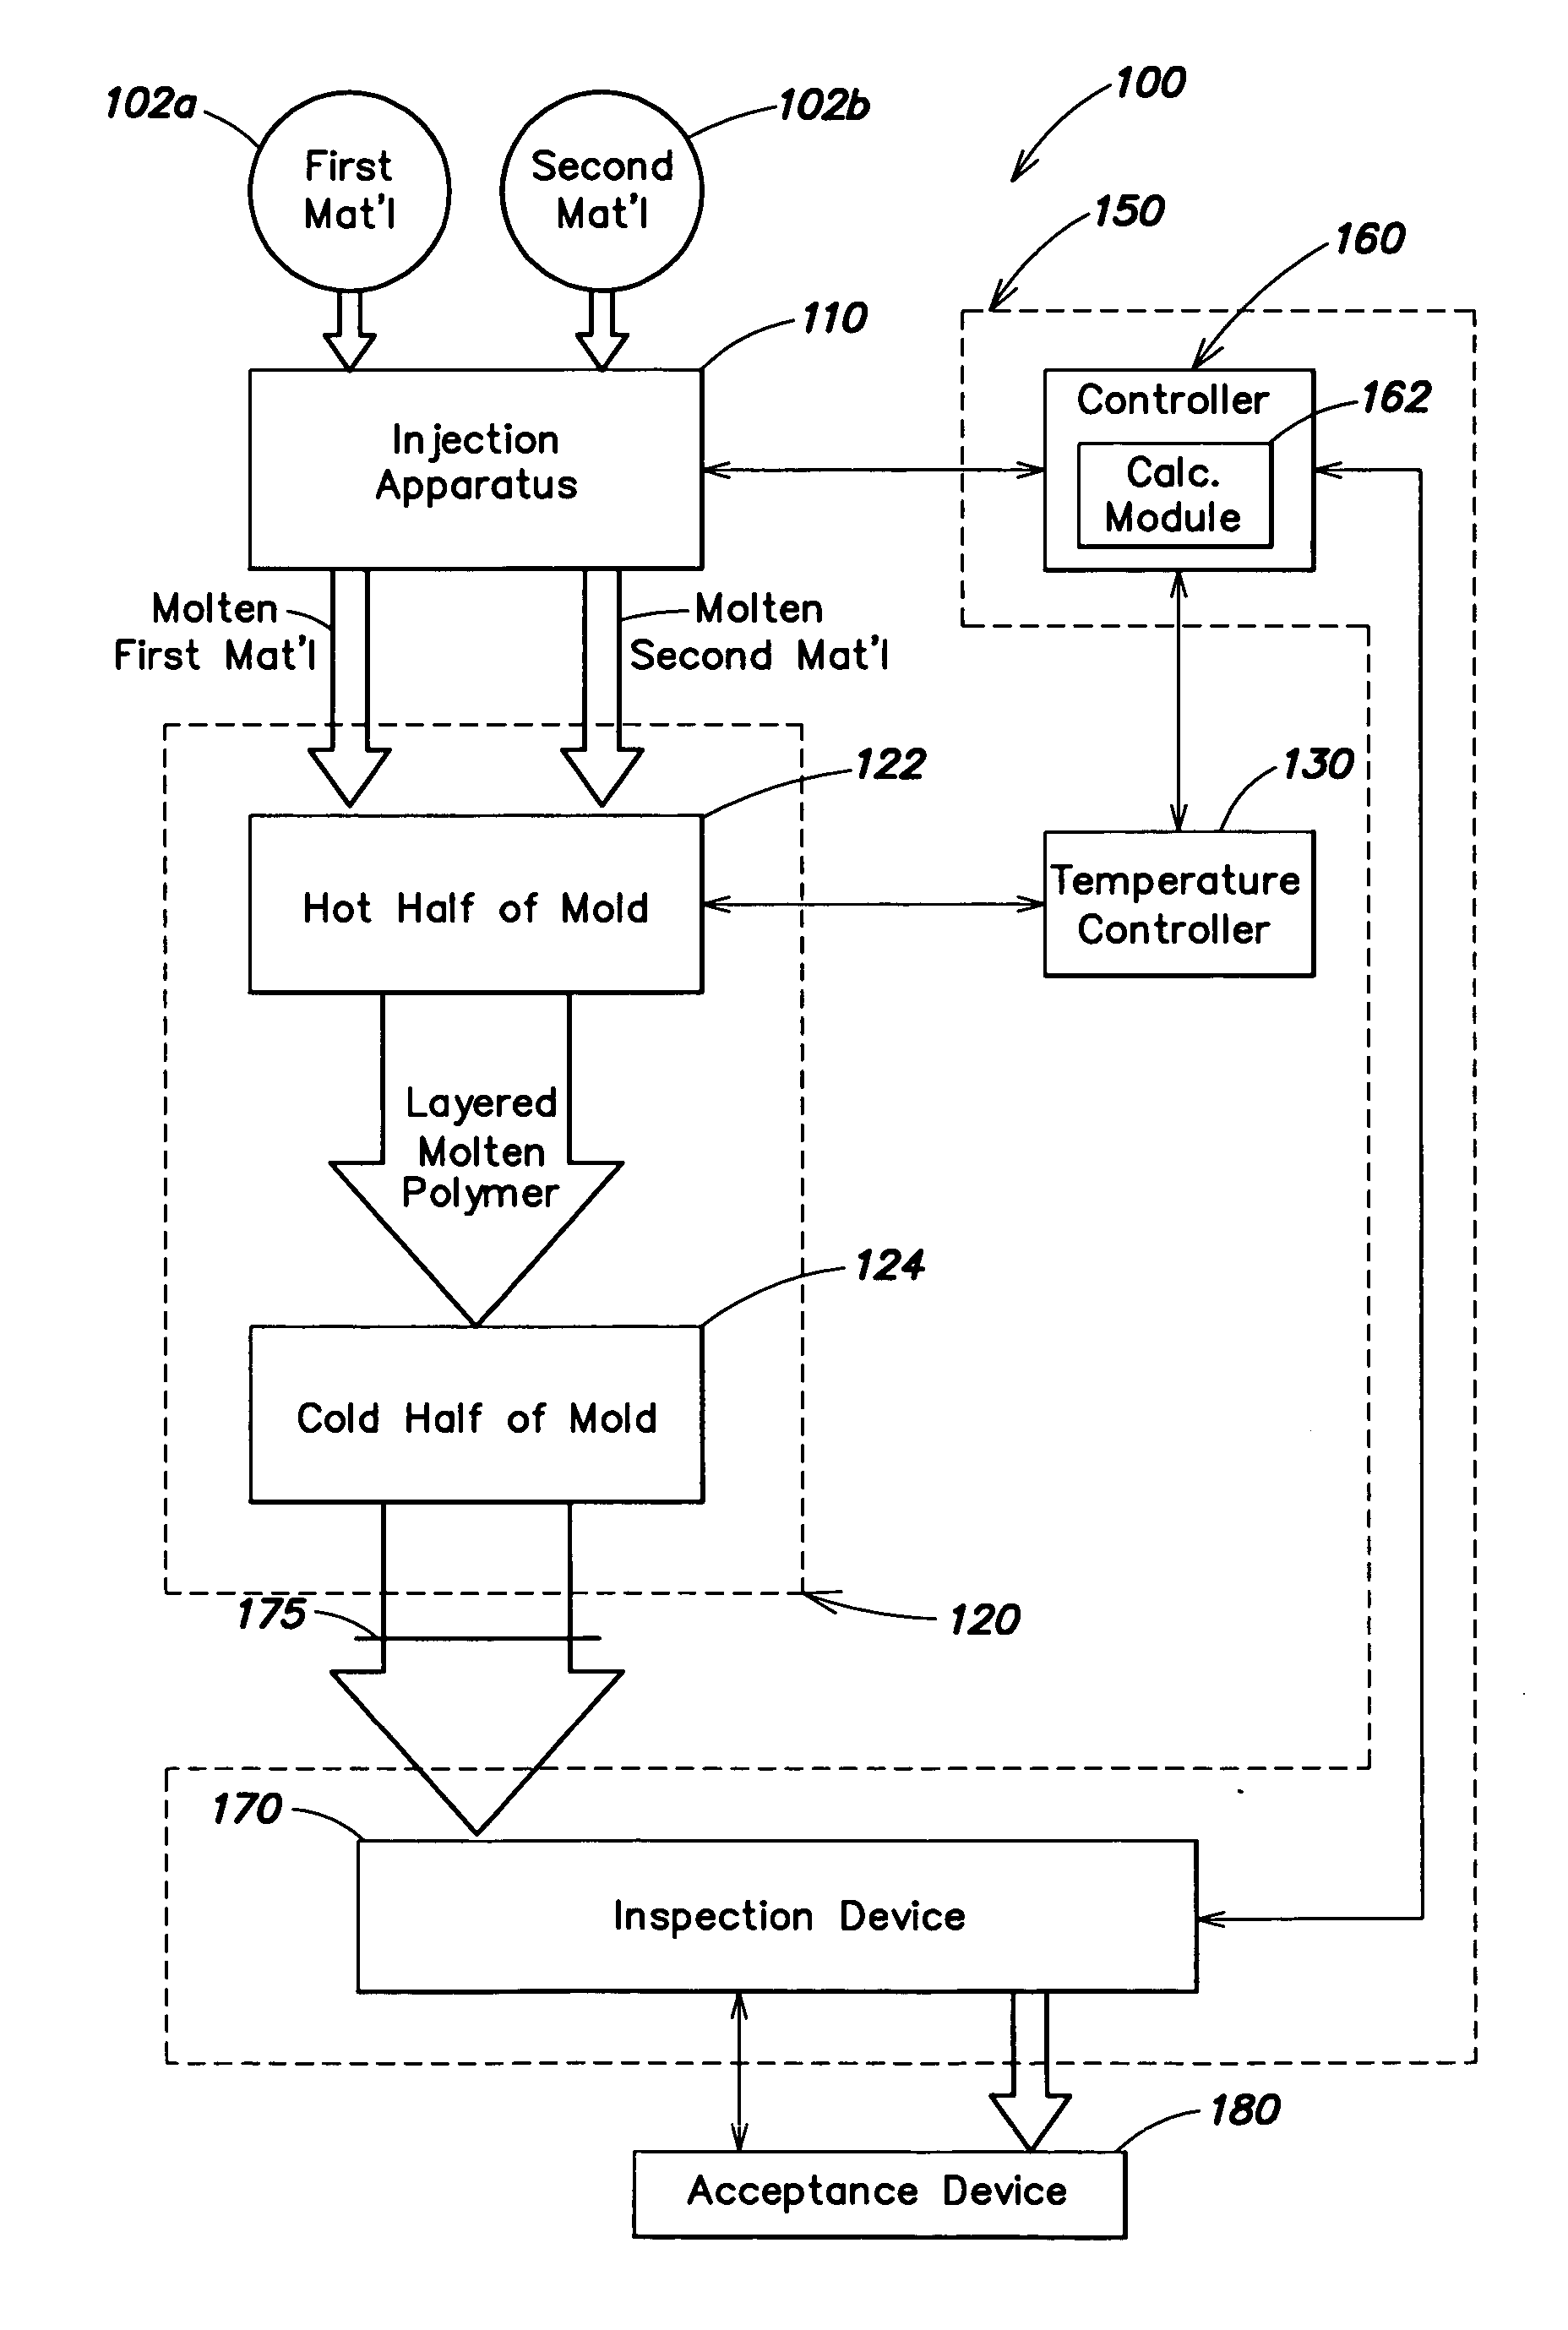 Automatic process control for a multilayer injection molding apparatus